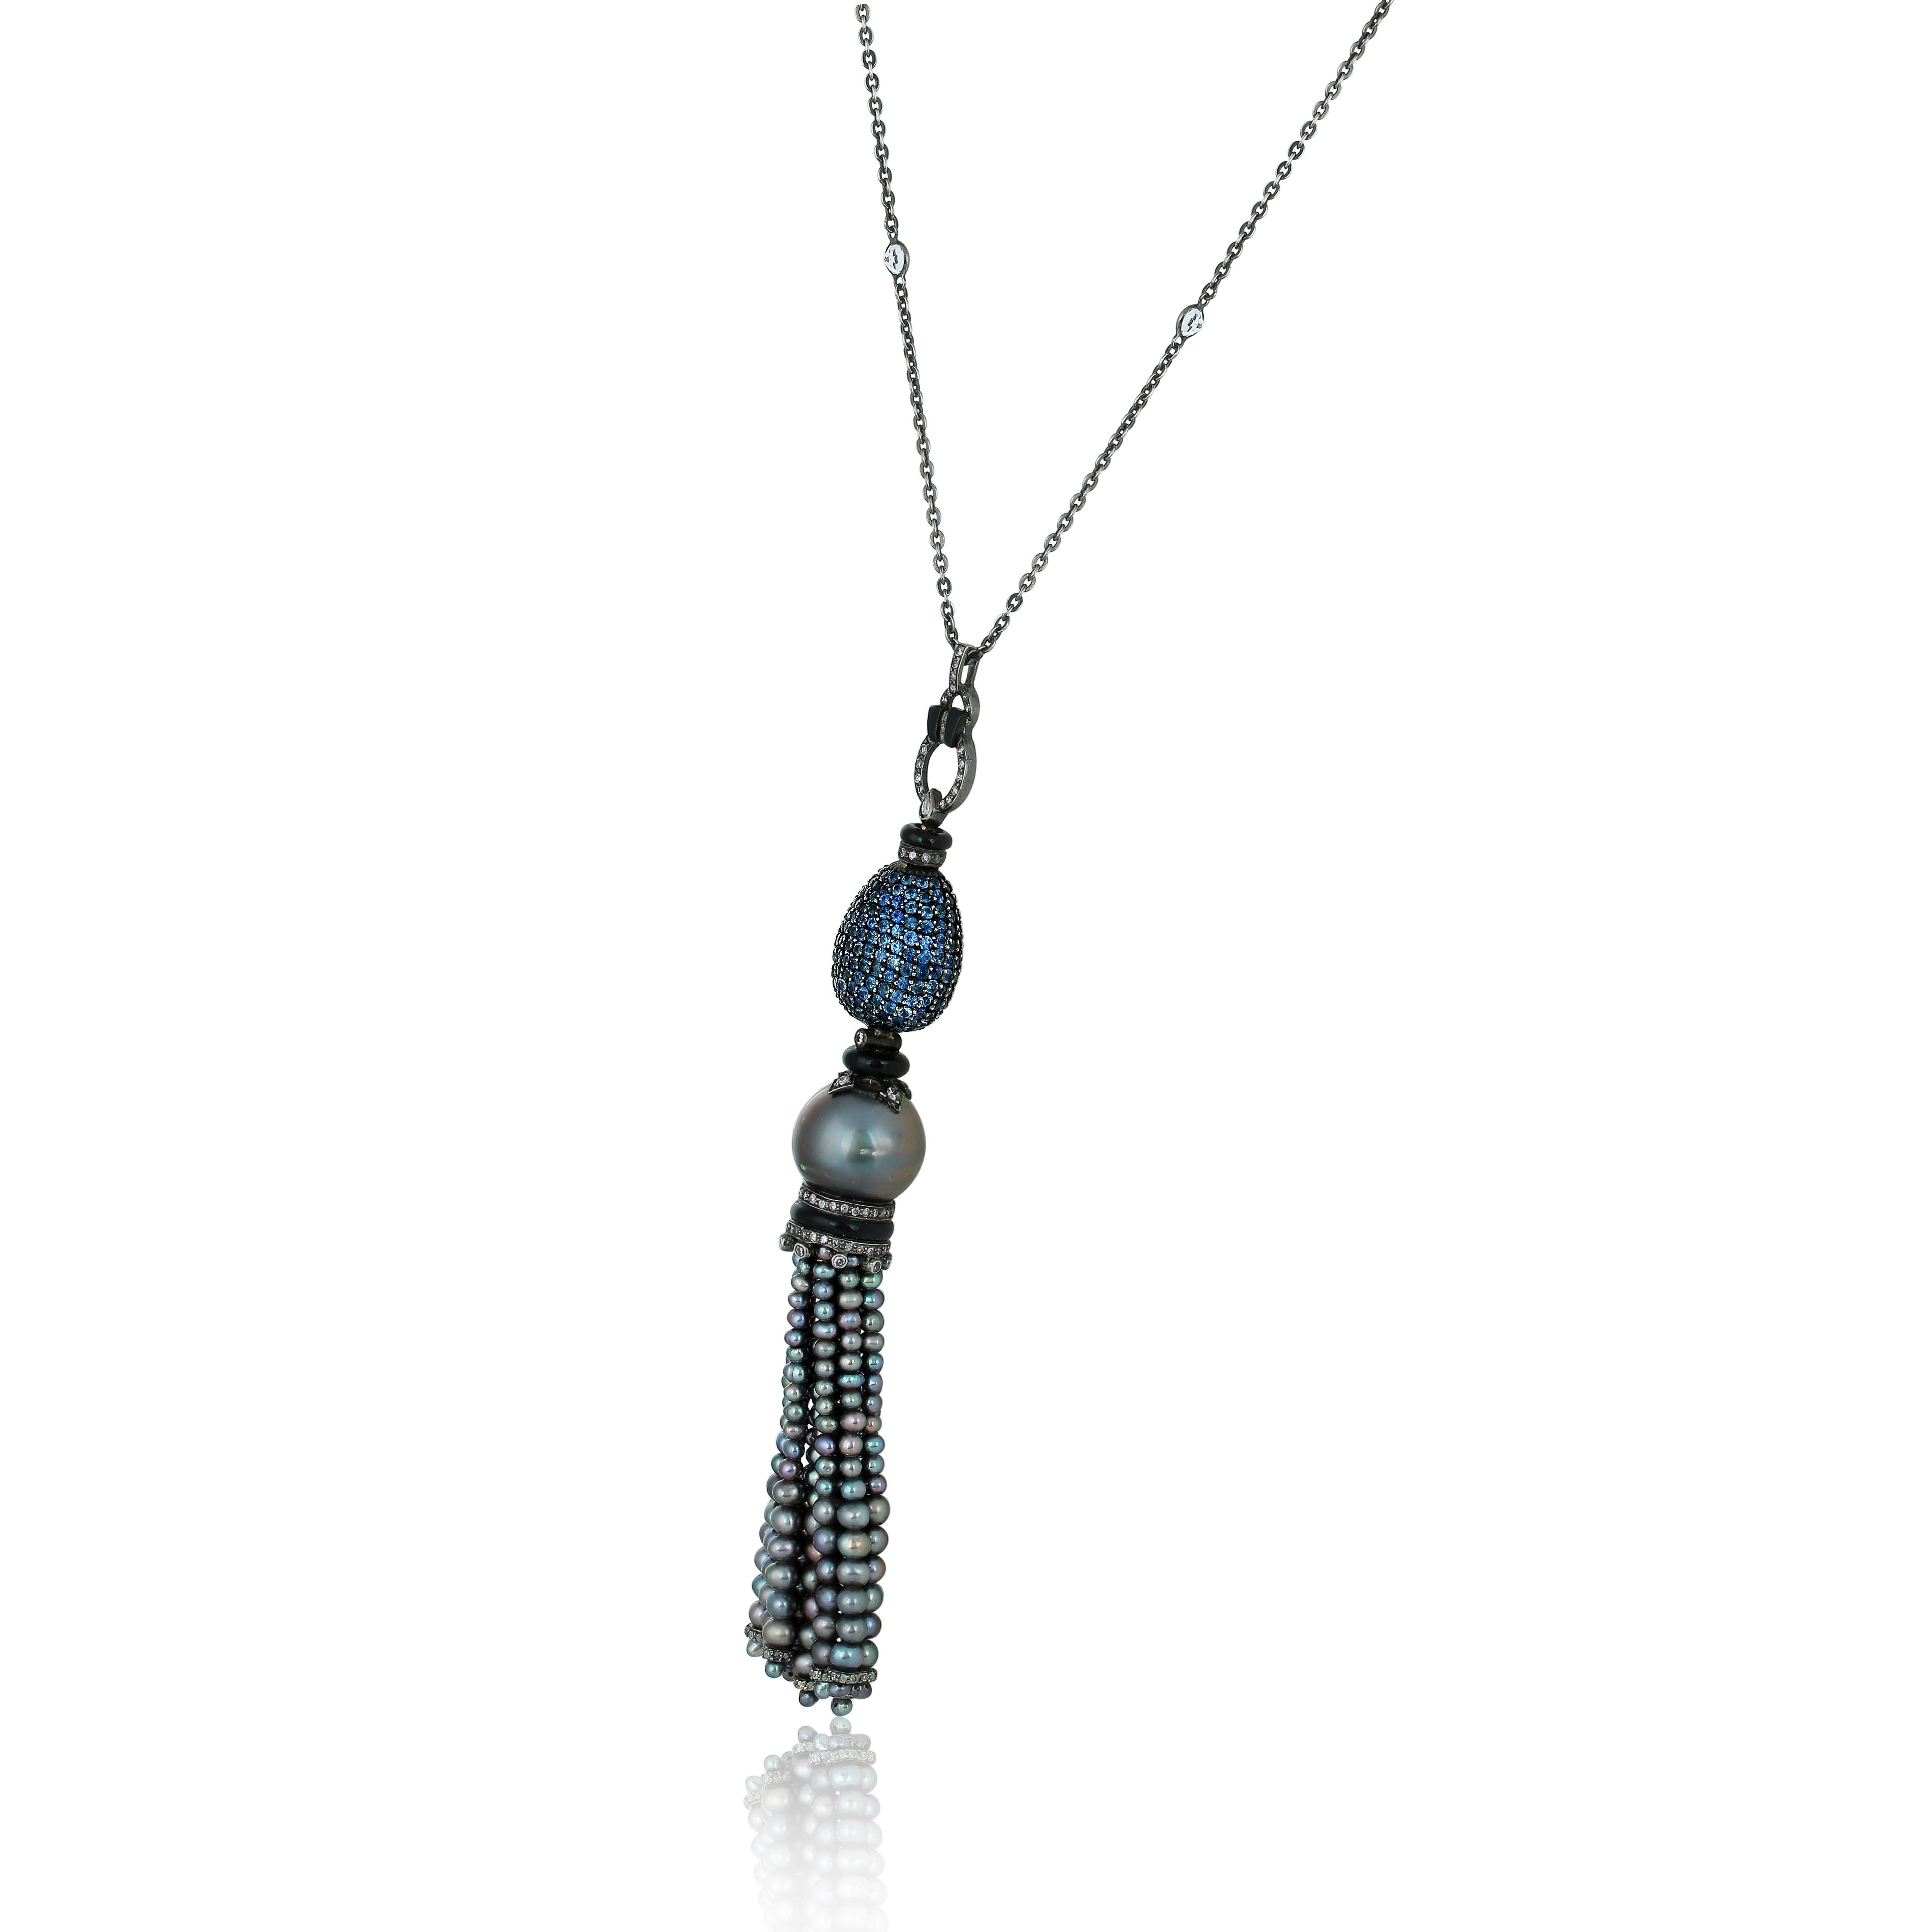 16 Ct T.W. Sapphire and Diamond Victorian Tassel Necklace with Pearls in 18k/925 In New Condition For Sale In New York, NY